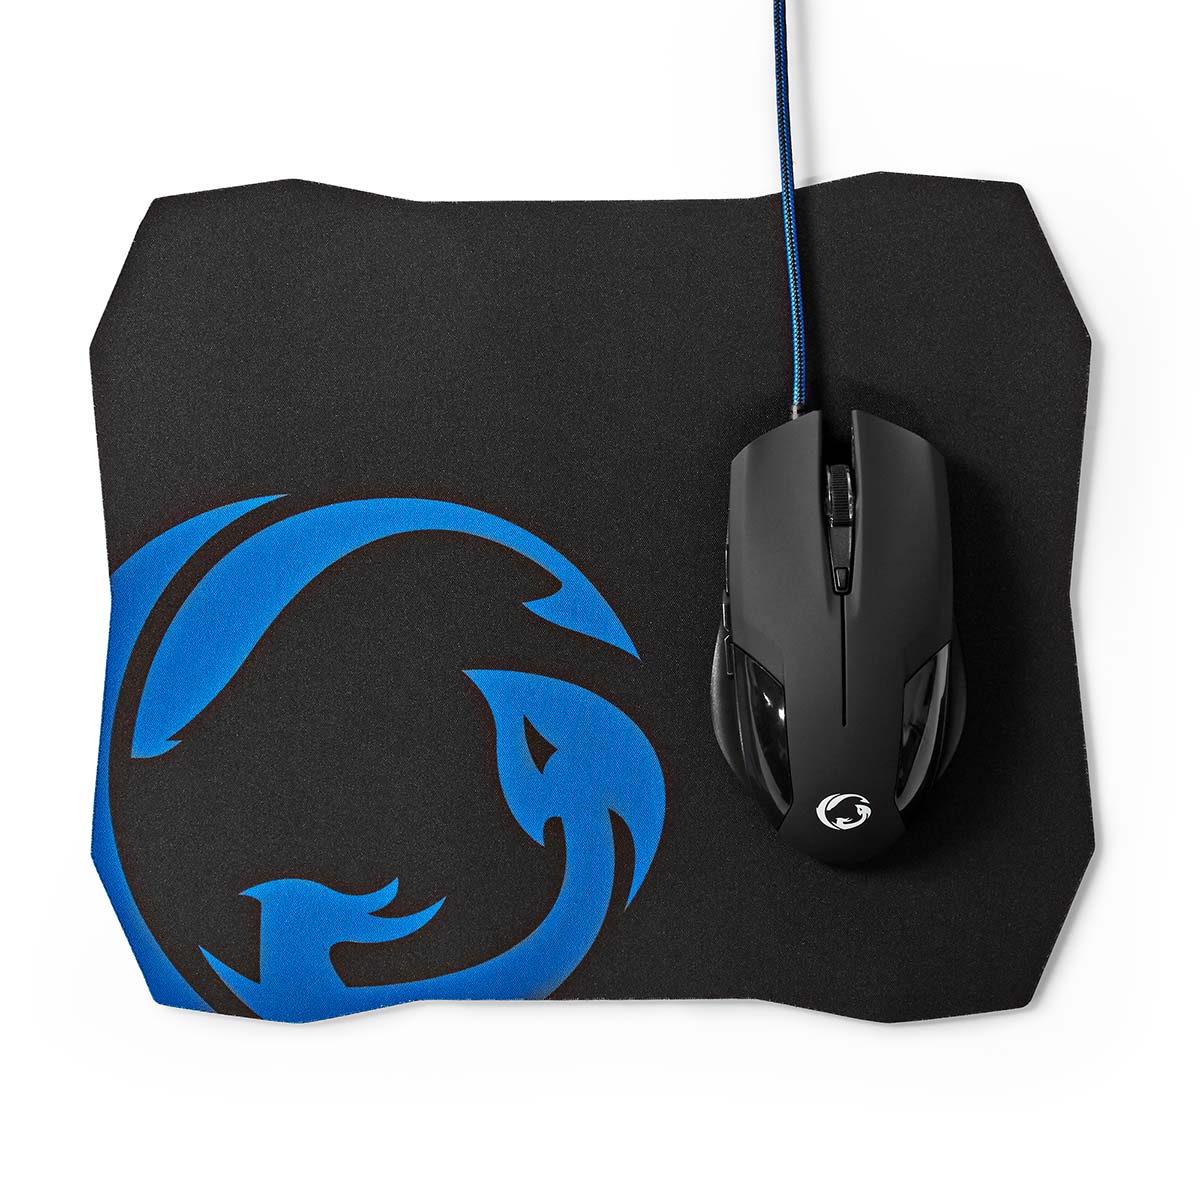 Gaming Mouse & Mouse Pad Set, Wired, 1200 / 2400 / 4800 / 7200 dpi, Adjustable DPI, Number of buttons: 6, Right-Handed, 1.50 m